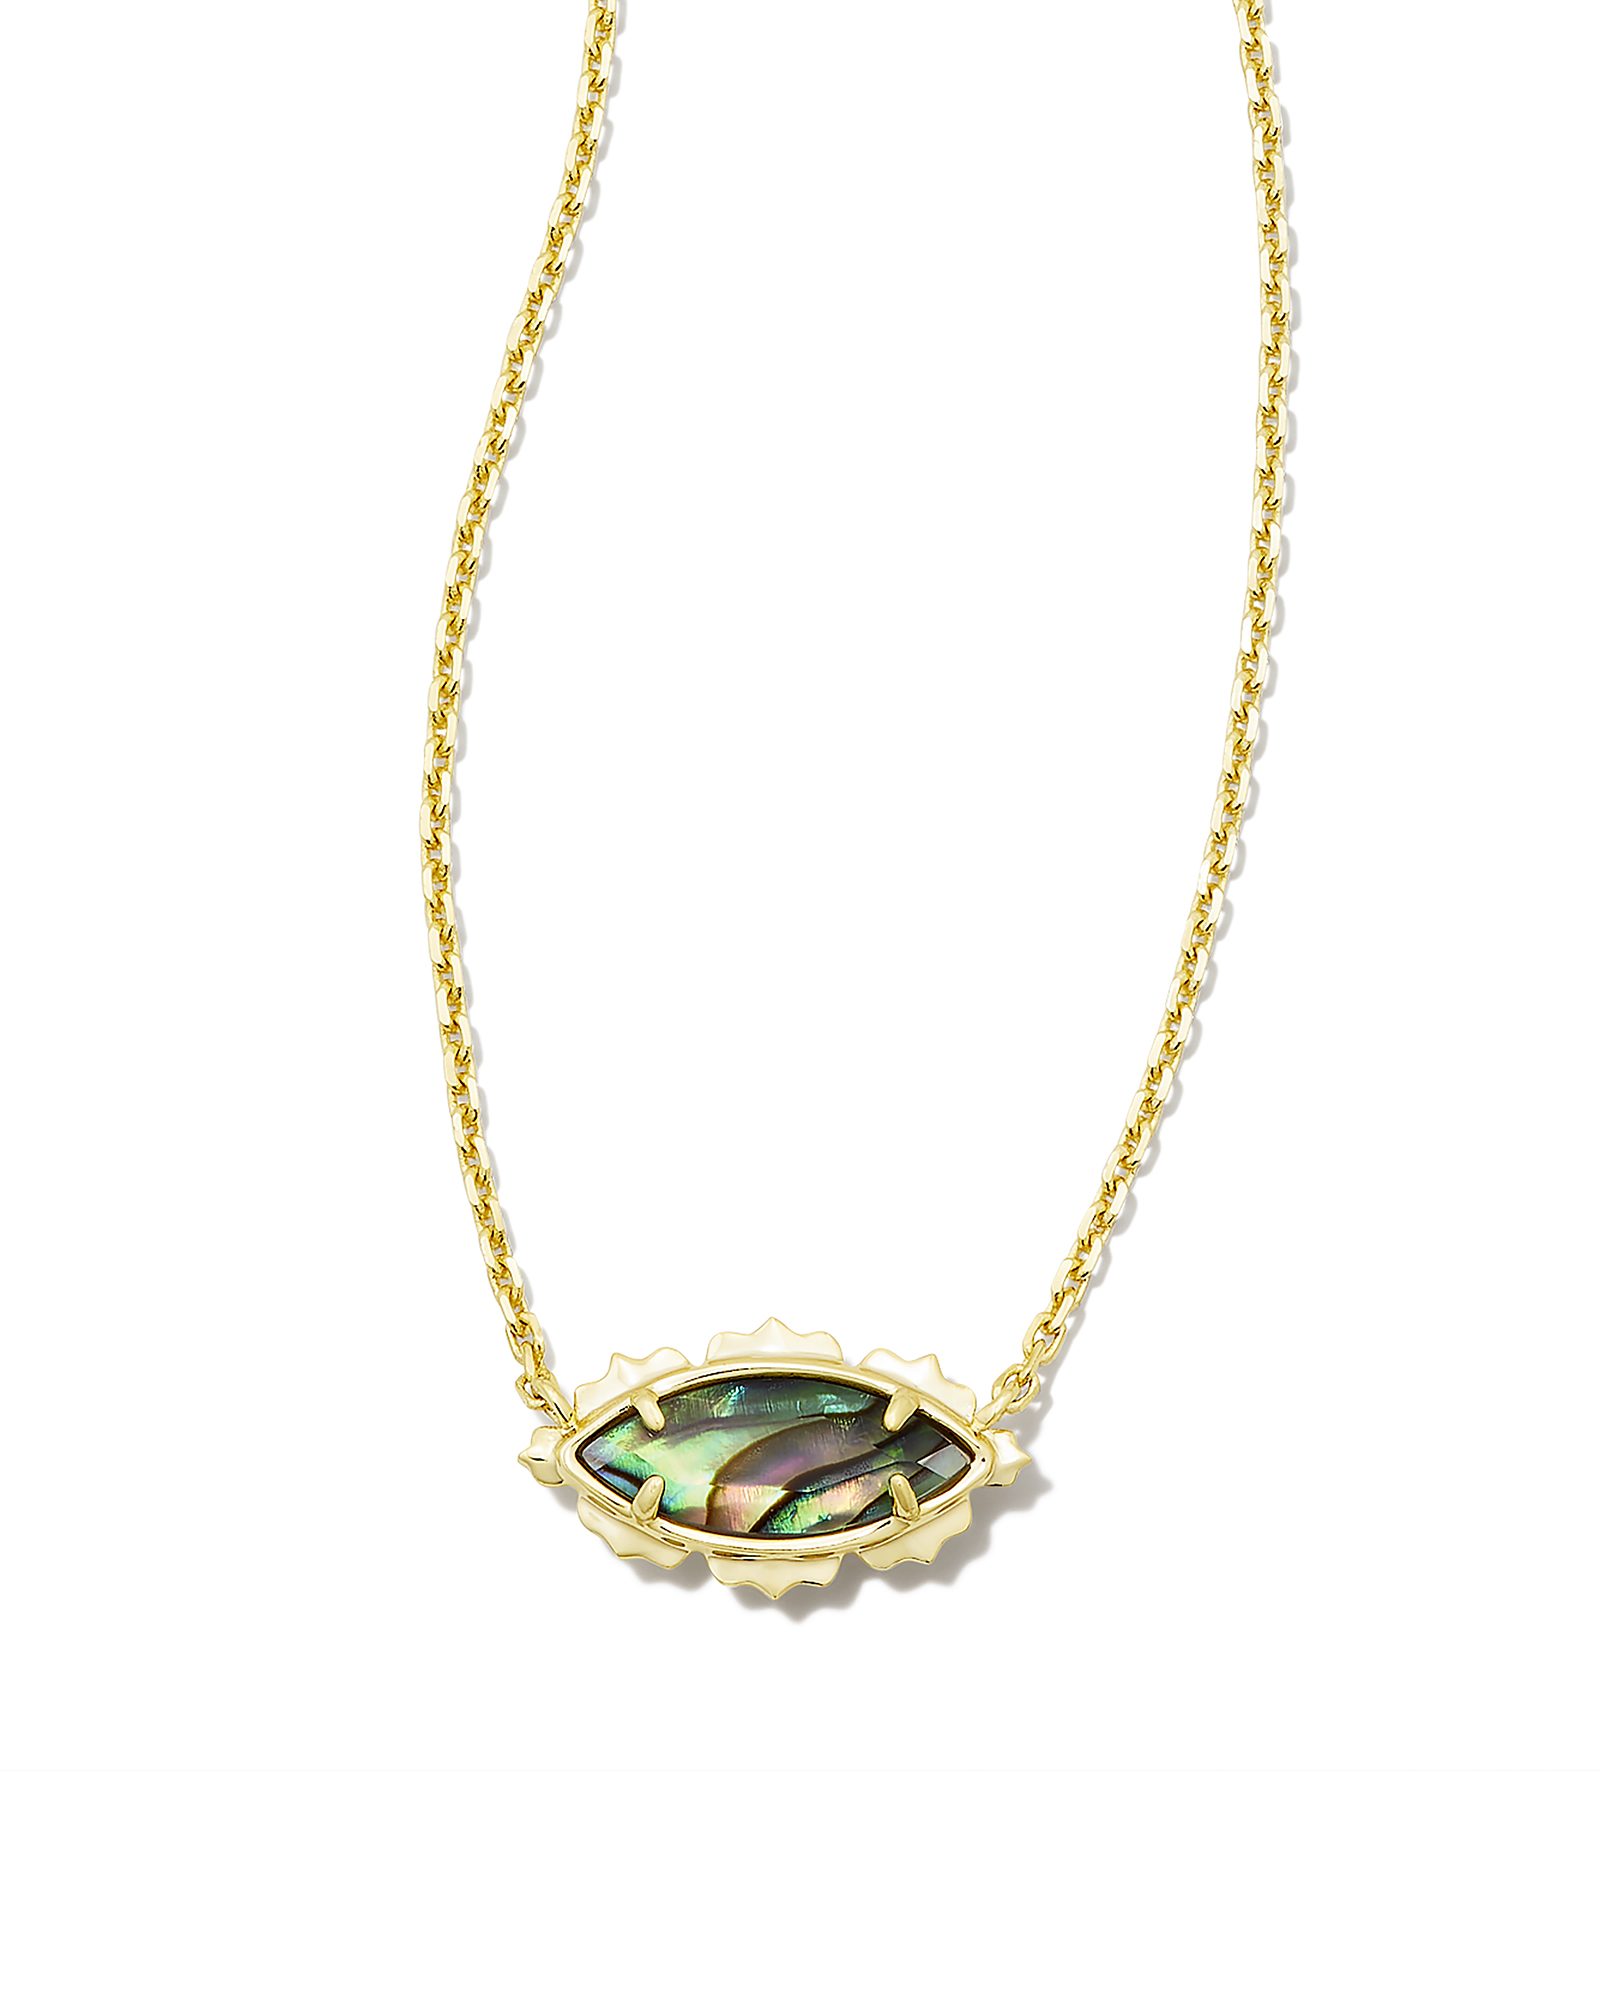 Kendra Scott Inez Gold Long Pendant Necklace in Abalone Shell: Precious  Accents, Ltd.